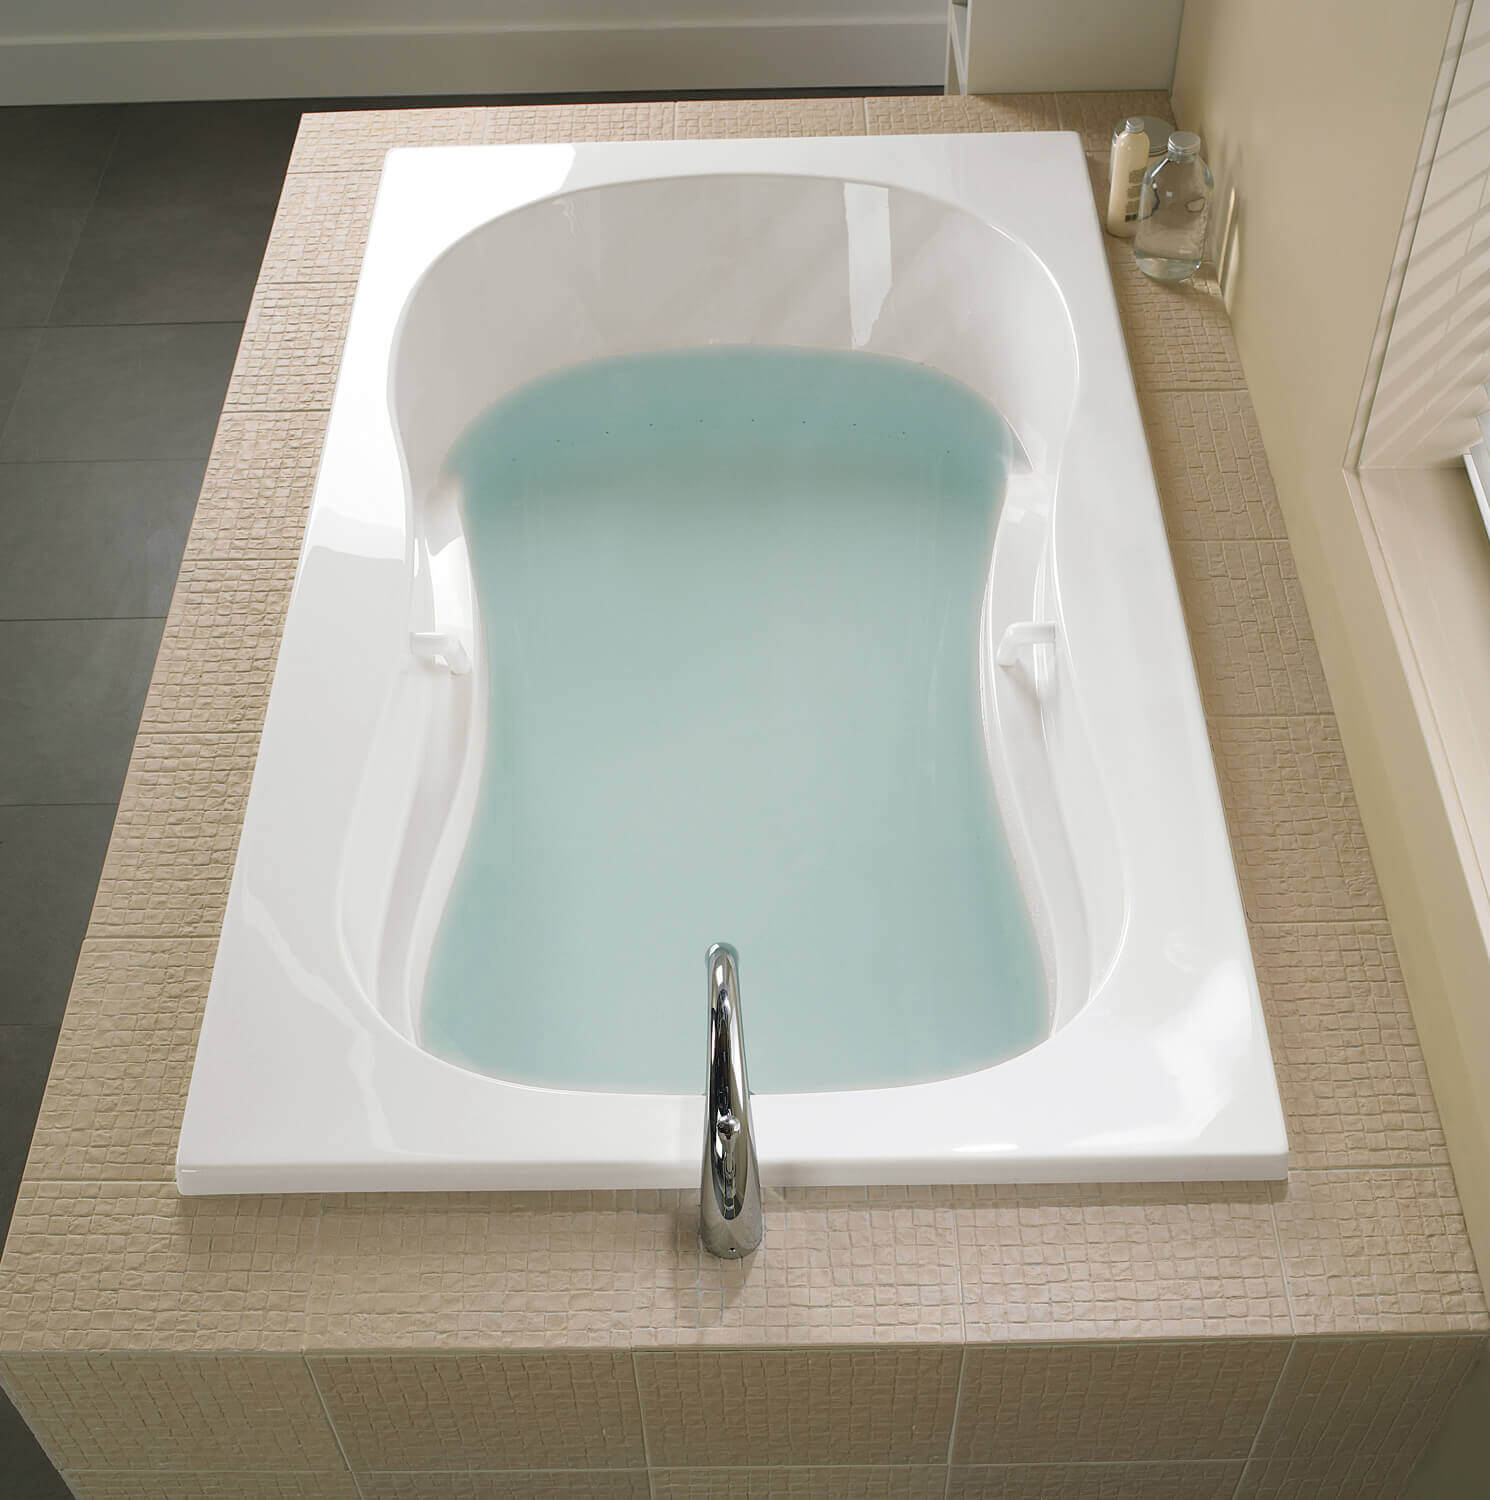 Bainultra Azur 50 collection alcove drop-in air jet bathtub for your master bathroom